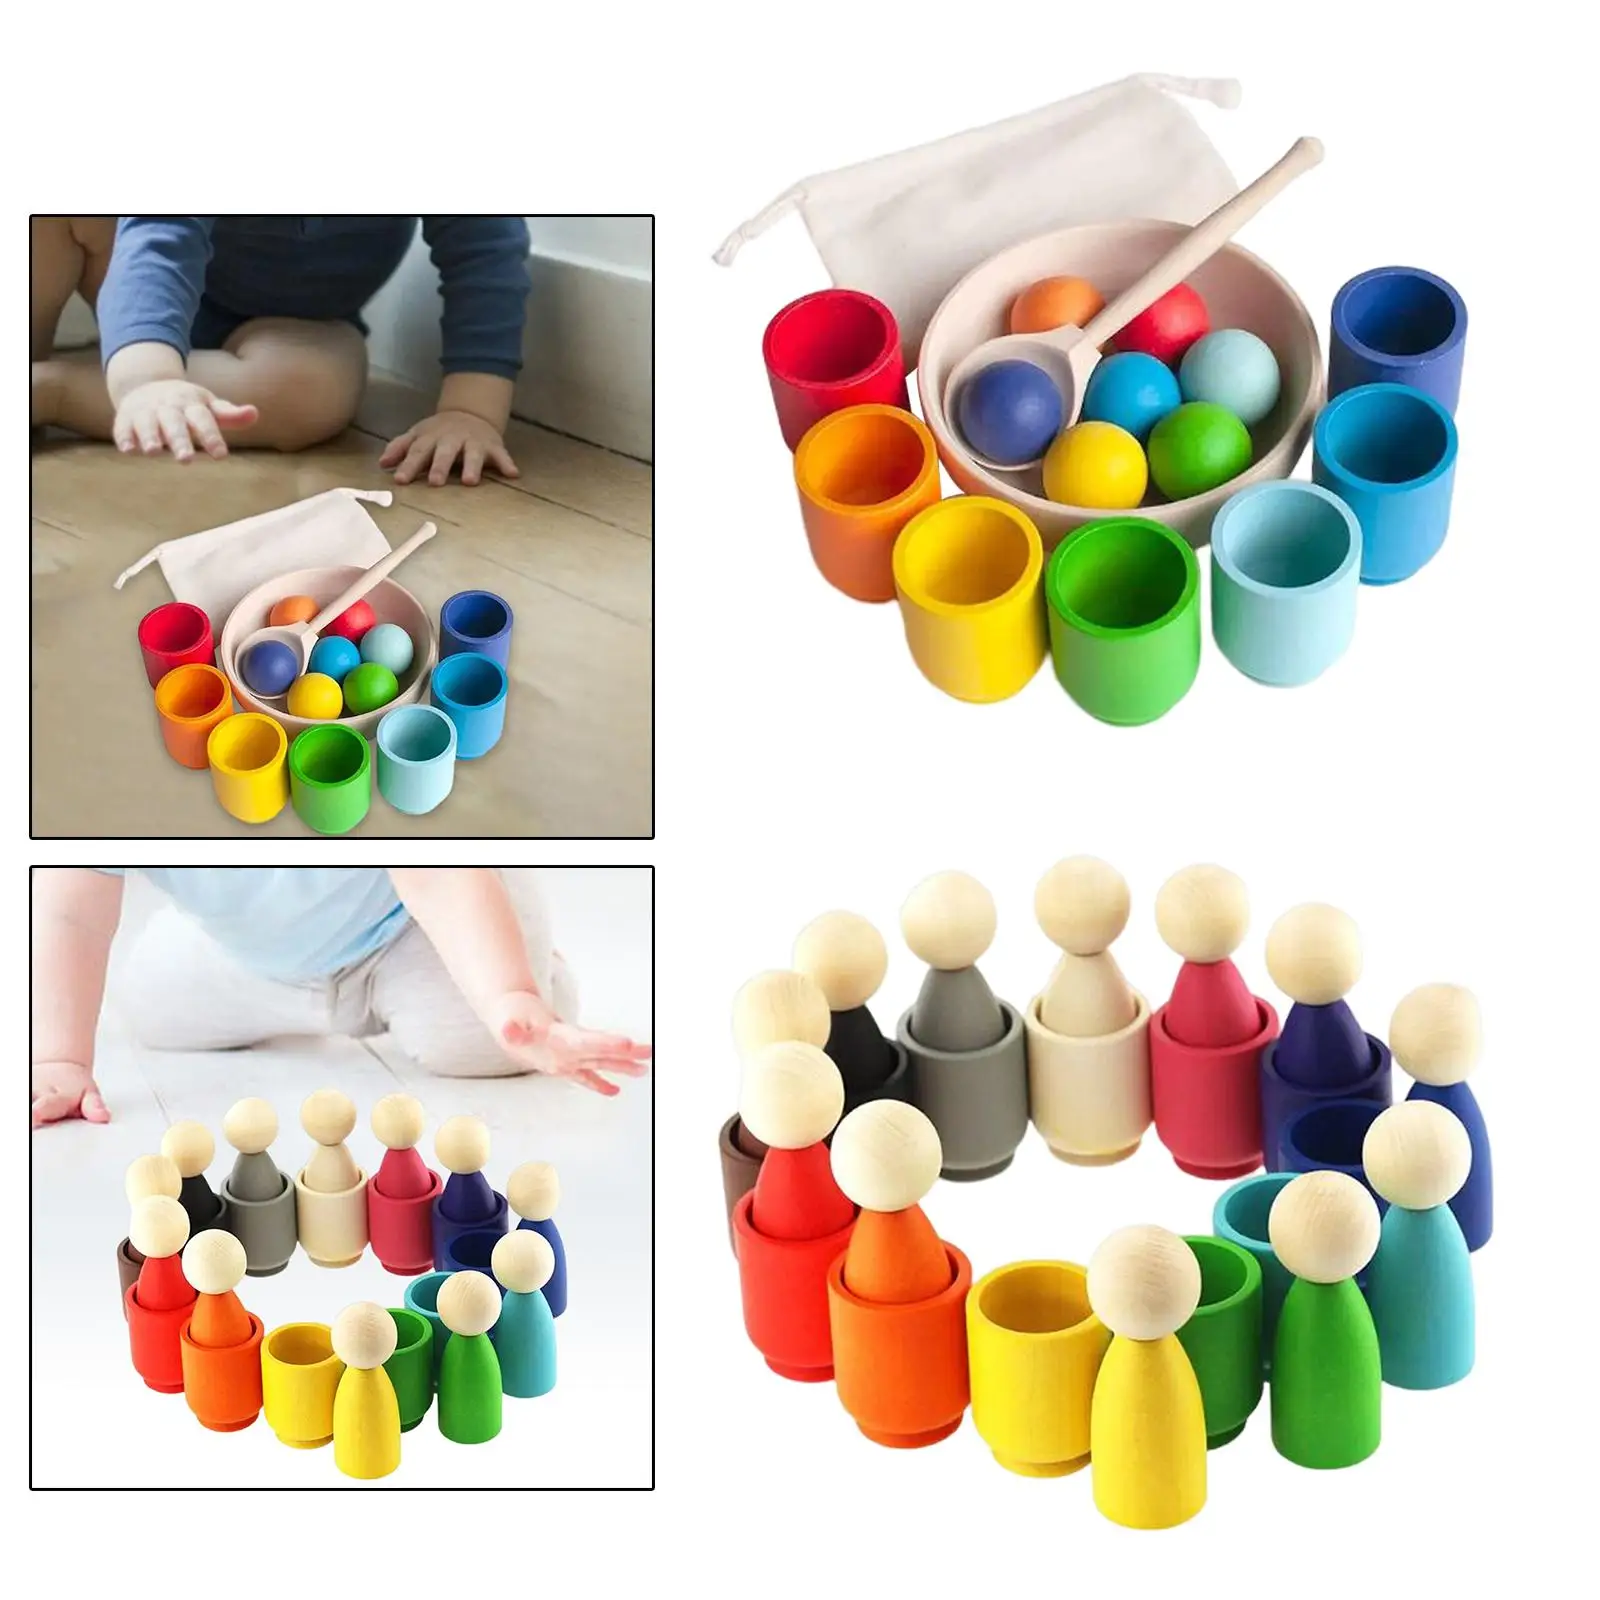 

Toddlers Rainbow Balls in Cups Montessori Toy Sorter Game Preschool Sensory Toys Training Logical Thinking for Children Kids